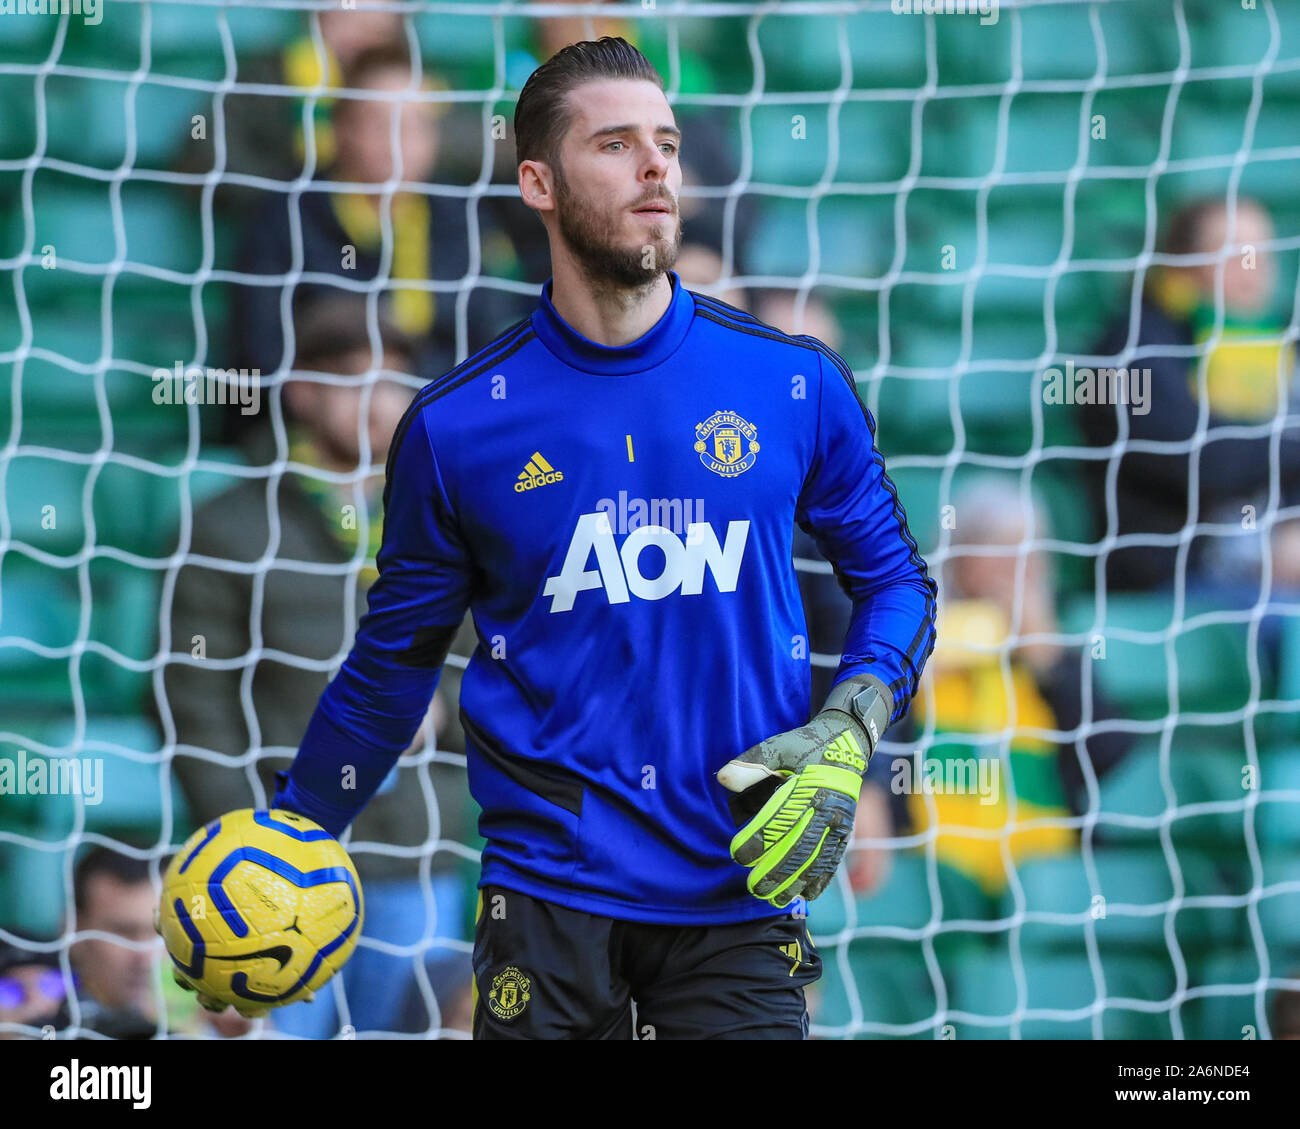 27th October 2019, Carrow Road, Norwich, England; Premier League, Norwich City v Manchester United : David de Gea (1) of Manchester United warming up  Credit: Mark Cosgrove/News Images Stock Photo